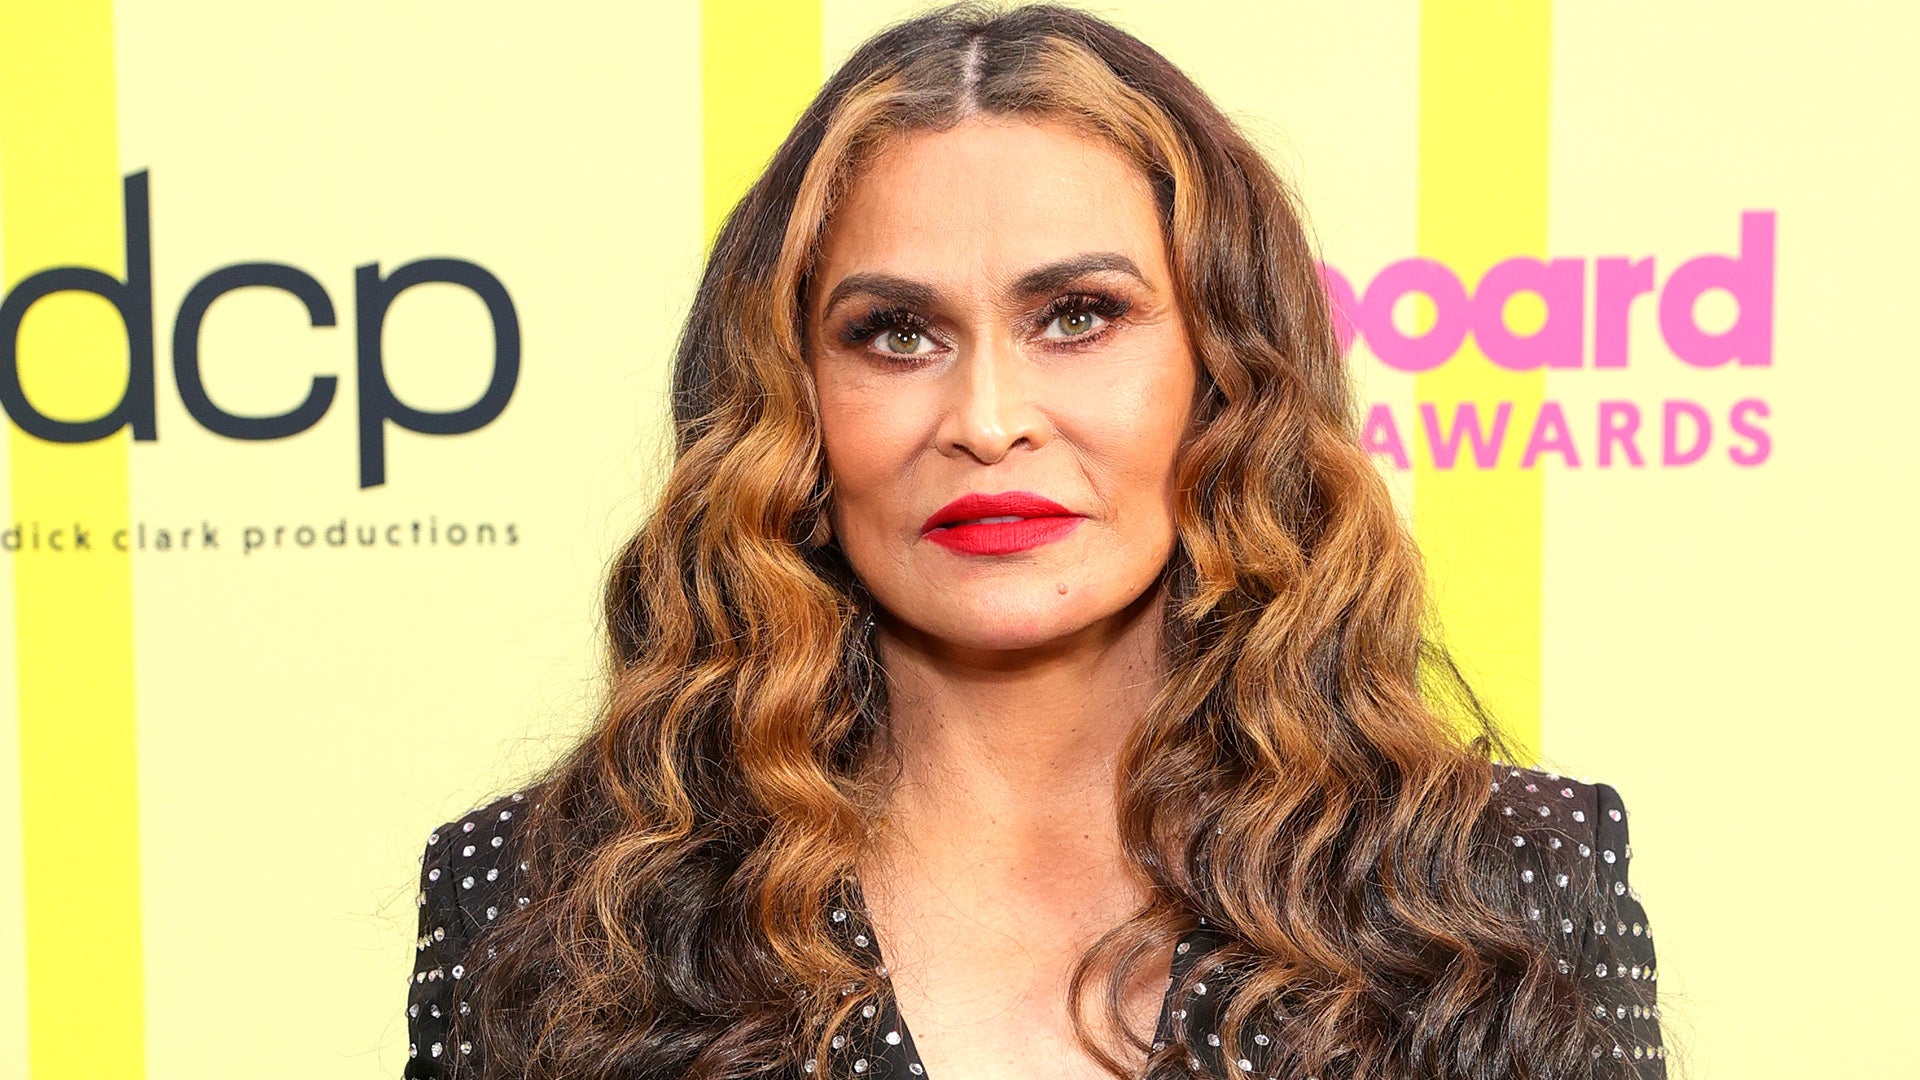 Beyoncé's Mom Tina Knowles' Los Angeles Home Robbed of $1 Million in Cash and Jewelry